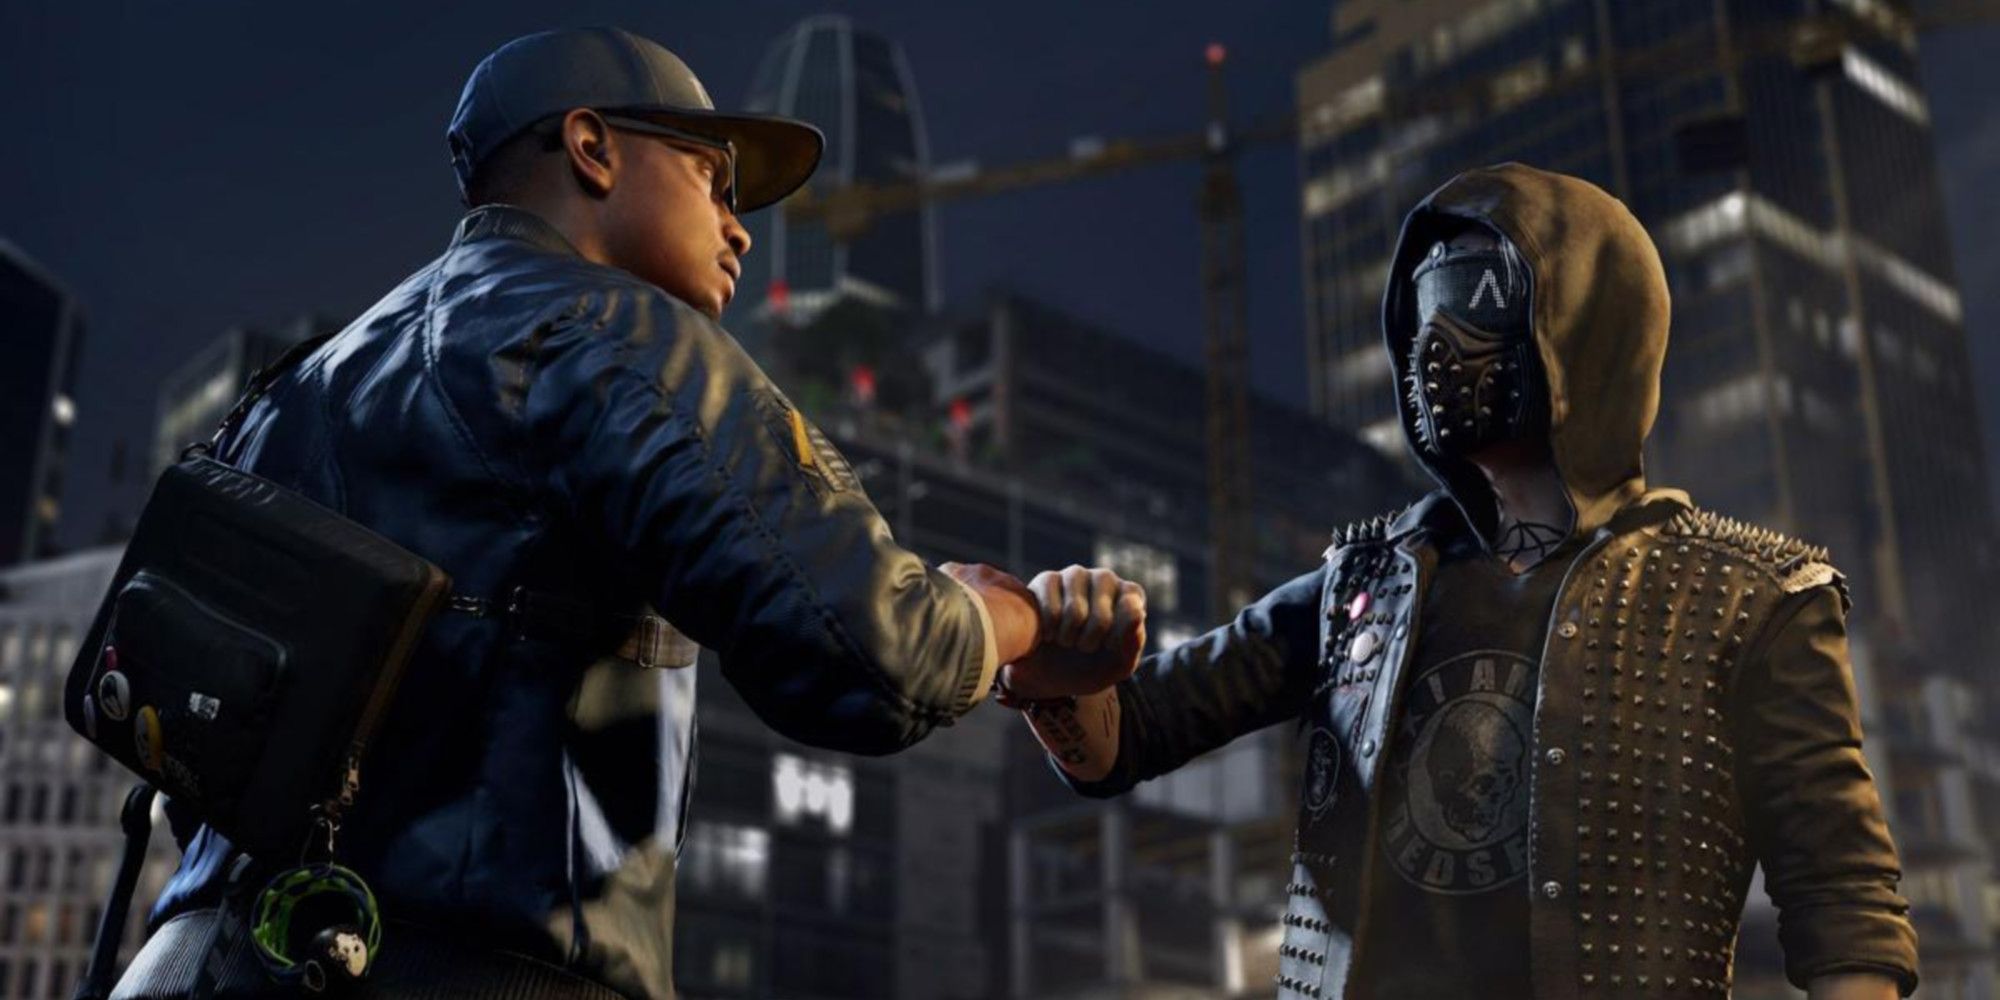 wrench watch dogs 2